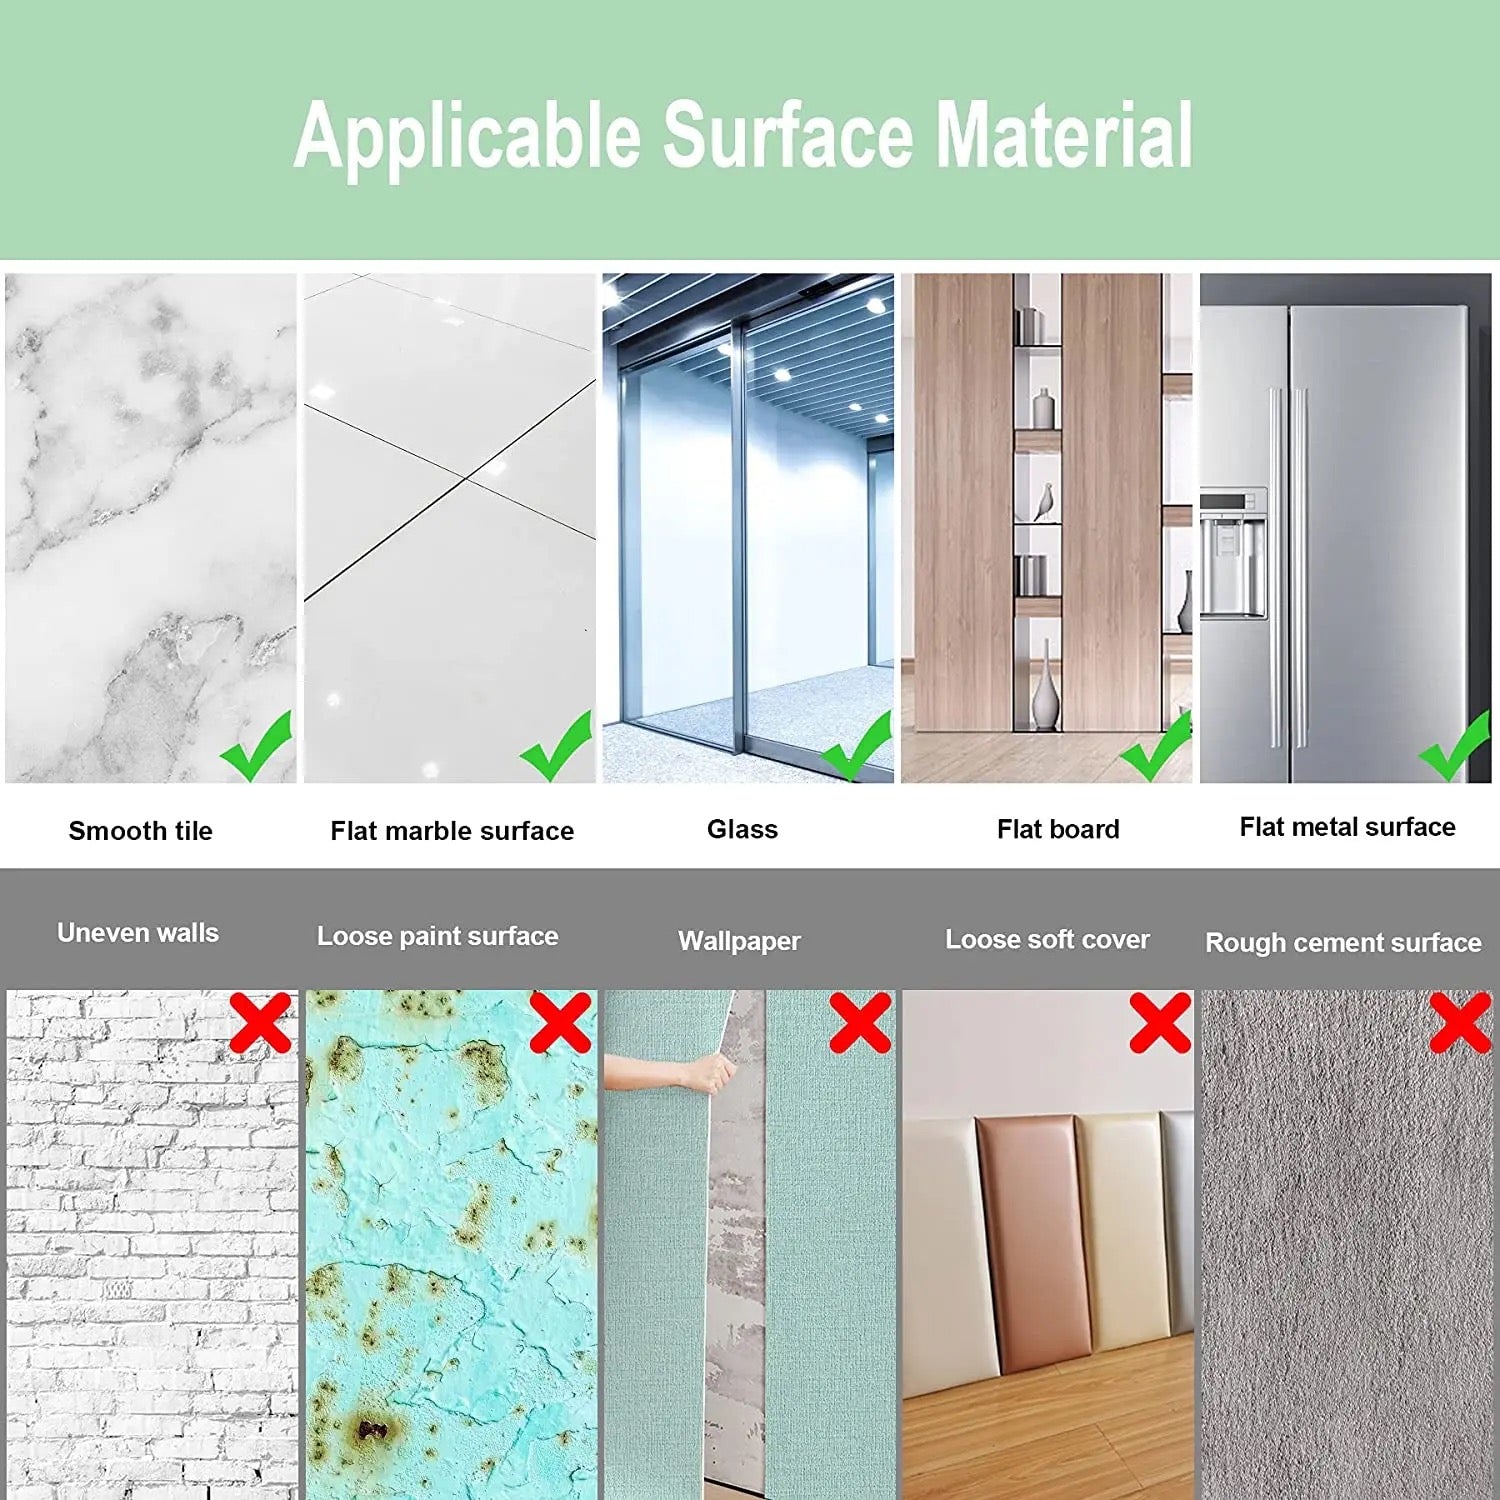 HD Self-Adhesive Acrylic Mirror Tiles showcasing their application on various surface materials